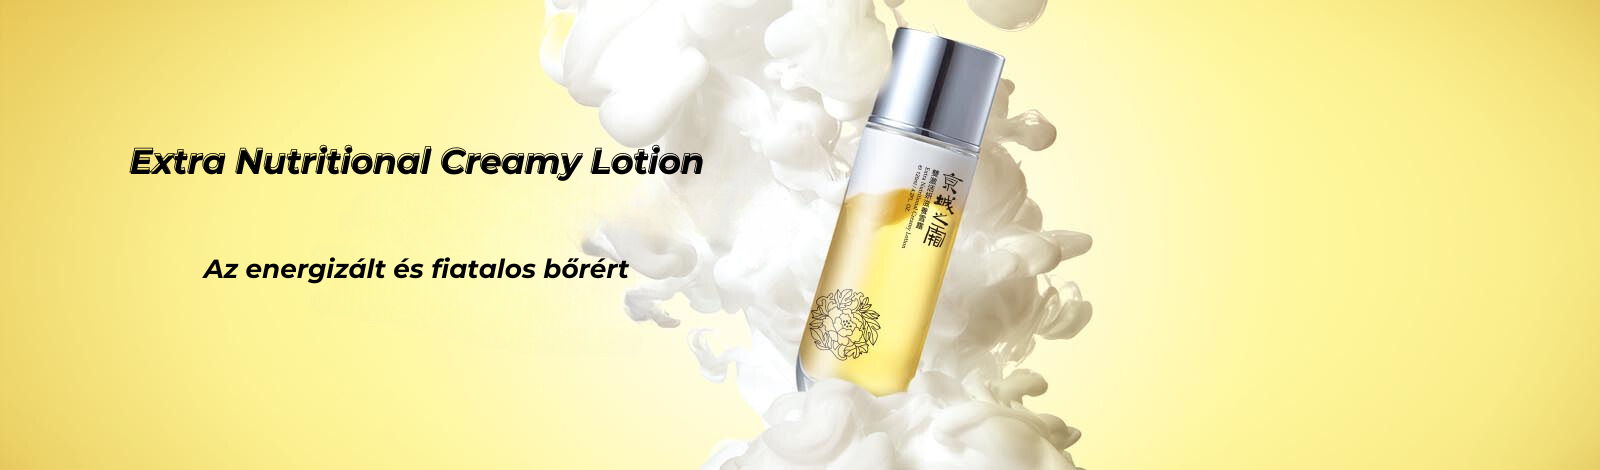 Extra Nutritional Creamy Lotion1